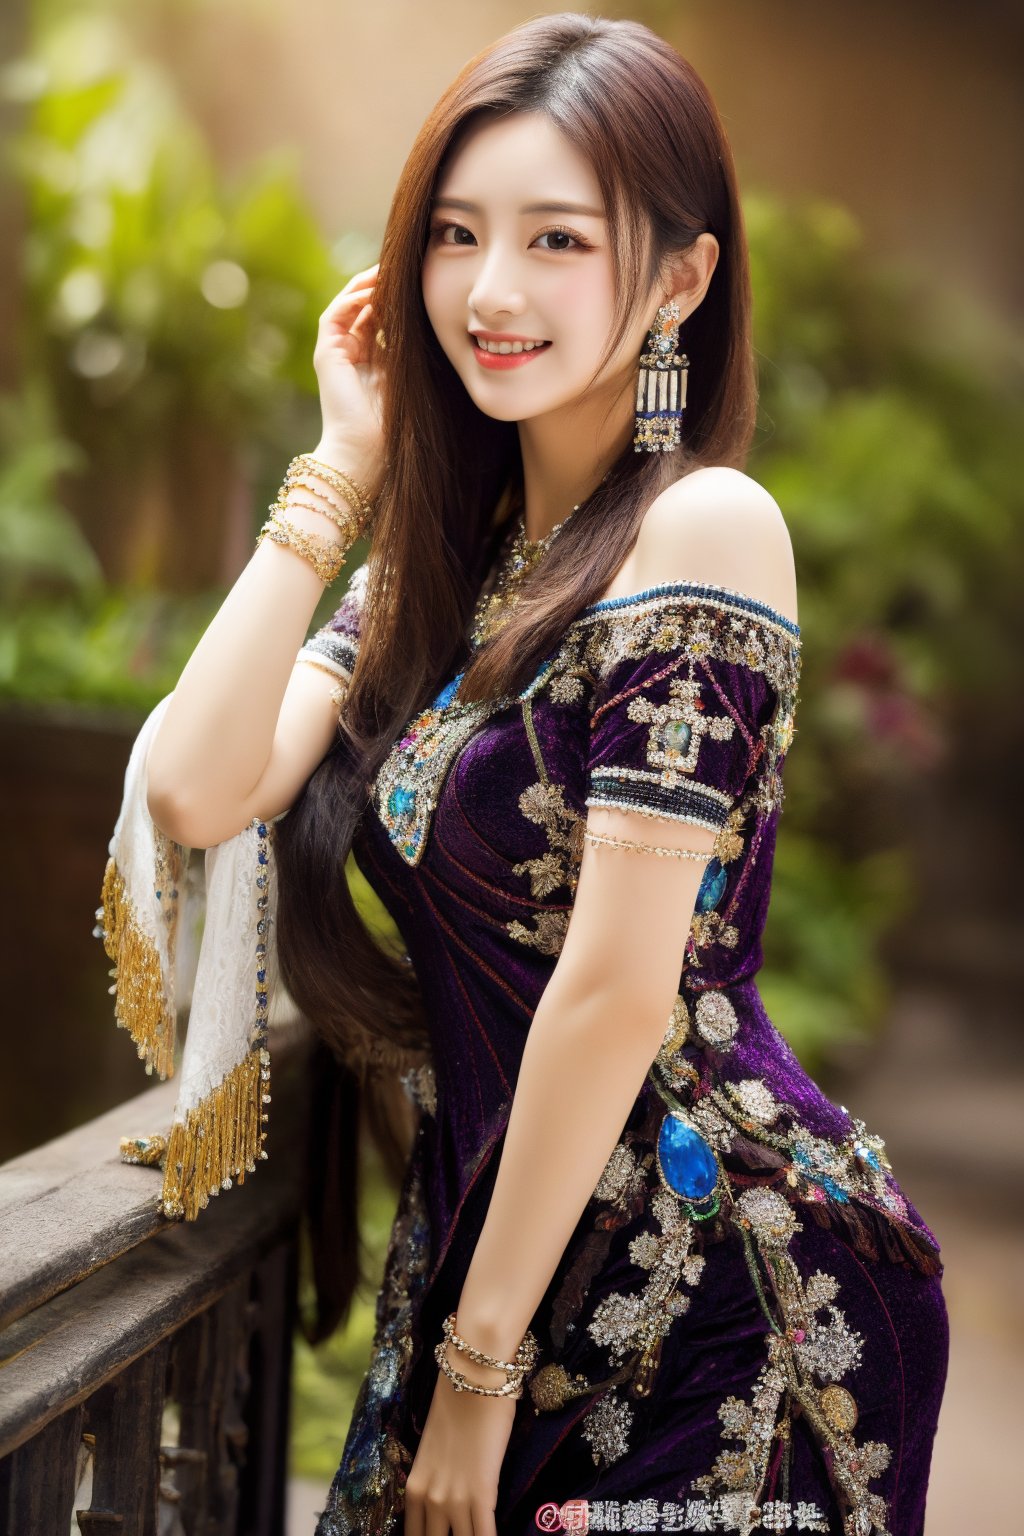 Masterpiece, best quality, super detailed, 
beautiful 20 years old Taiwanese girl, solo,
front shot,
exposed shoulders,
Side glance pose,
Hourglass full body, 
realistic portrait,
Flower Hair clip,
Fringe,
long hair,
brown Alluring eyes,
smile,
Elegant hands,
beaded bracelet,
beautiful Slim long leg,
high heels, 
cheongsam,